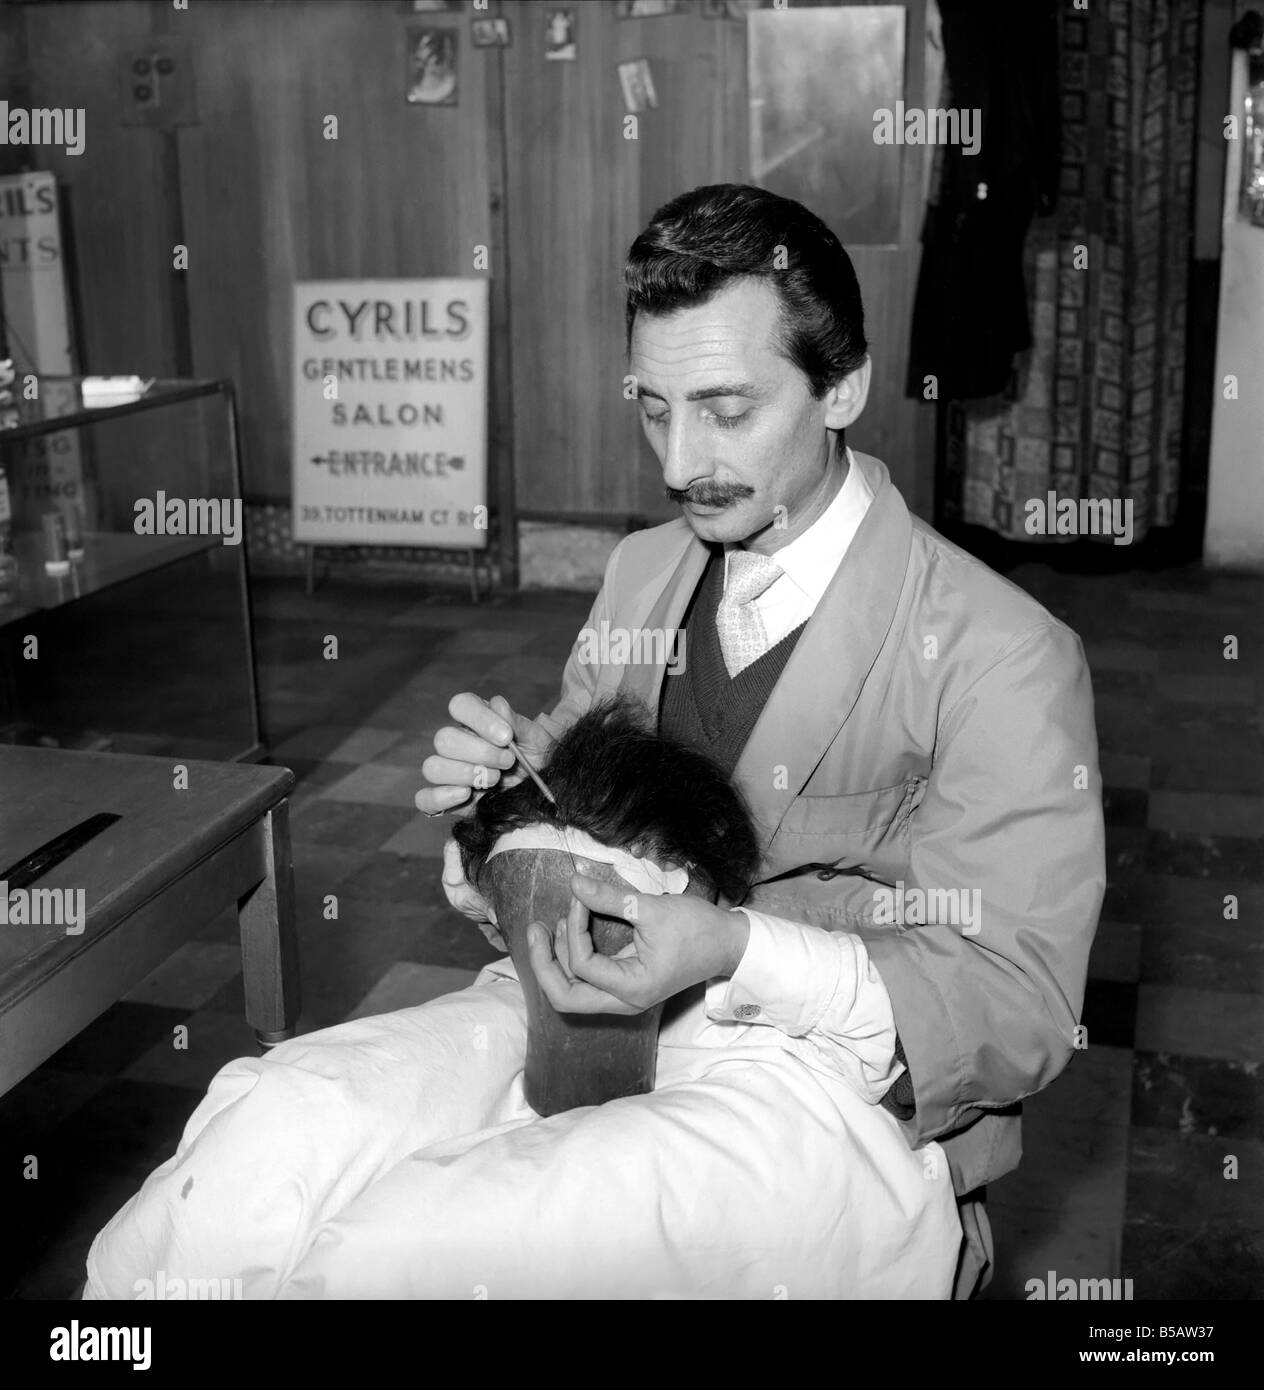 Wig Maker: Josephine Anne's hair is made into a wig for Peter Kent. Our  picture show how this was completed at Cyrils Gentlemens Hair Salon.  February 1958 A635-009 Stock Photo - Alamy